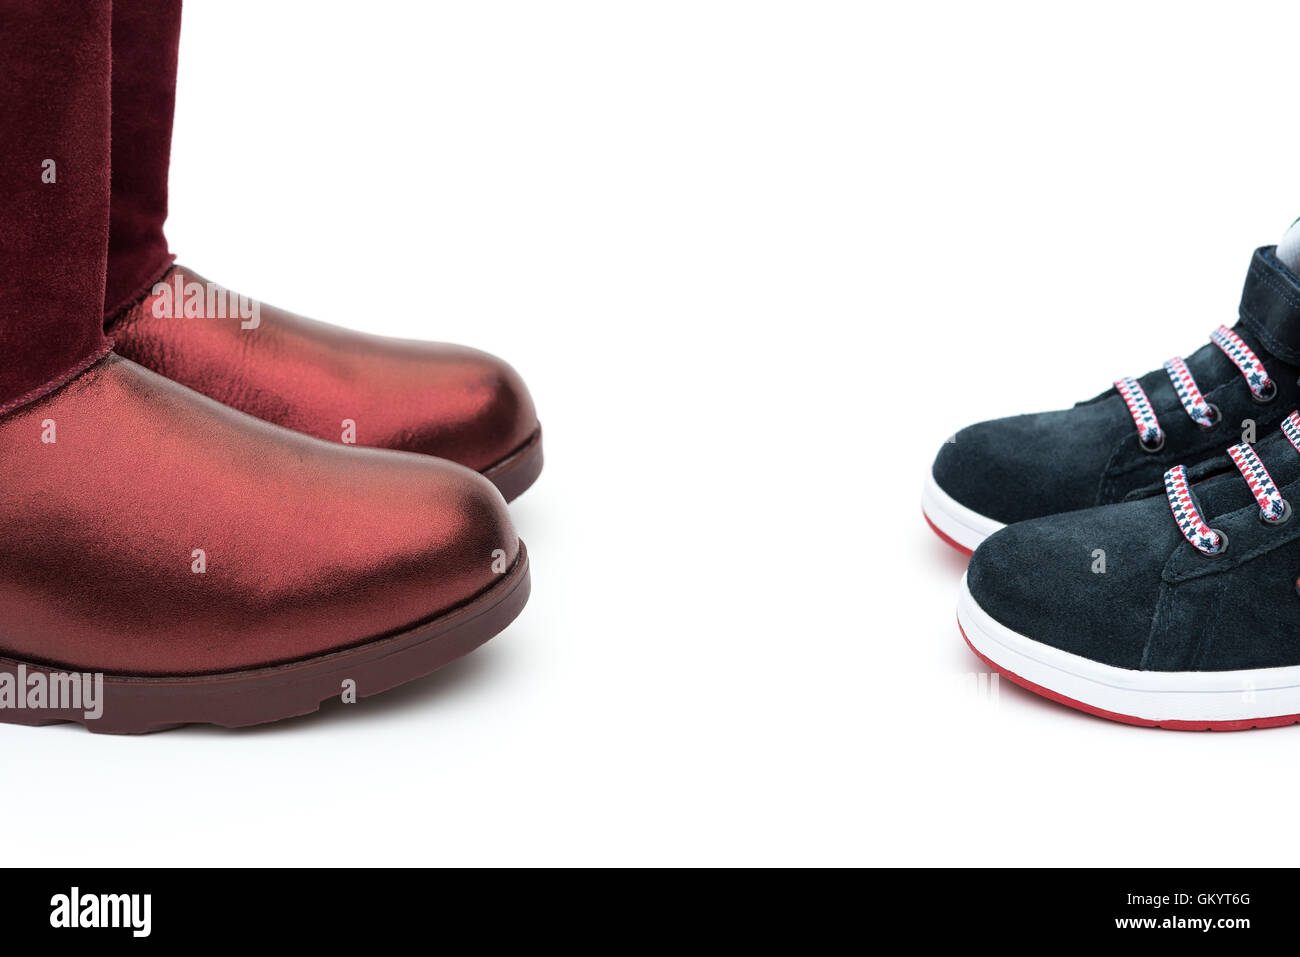 black shoes for son and red ones for mom on white as filiation concept Stock Photo